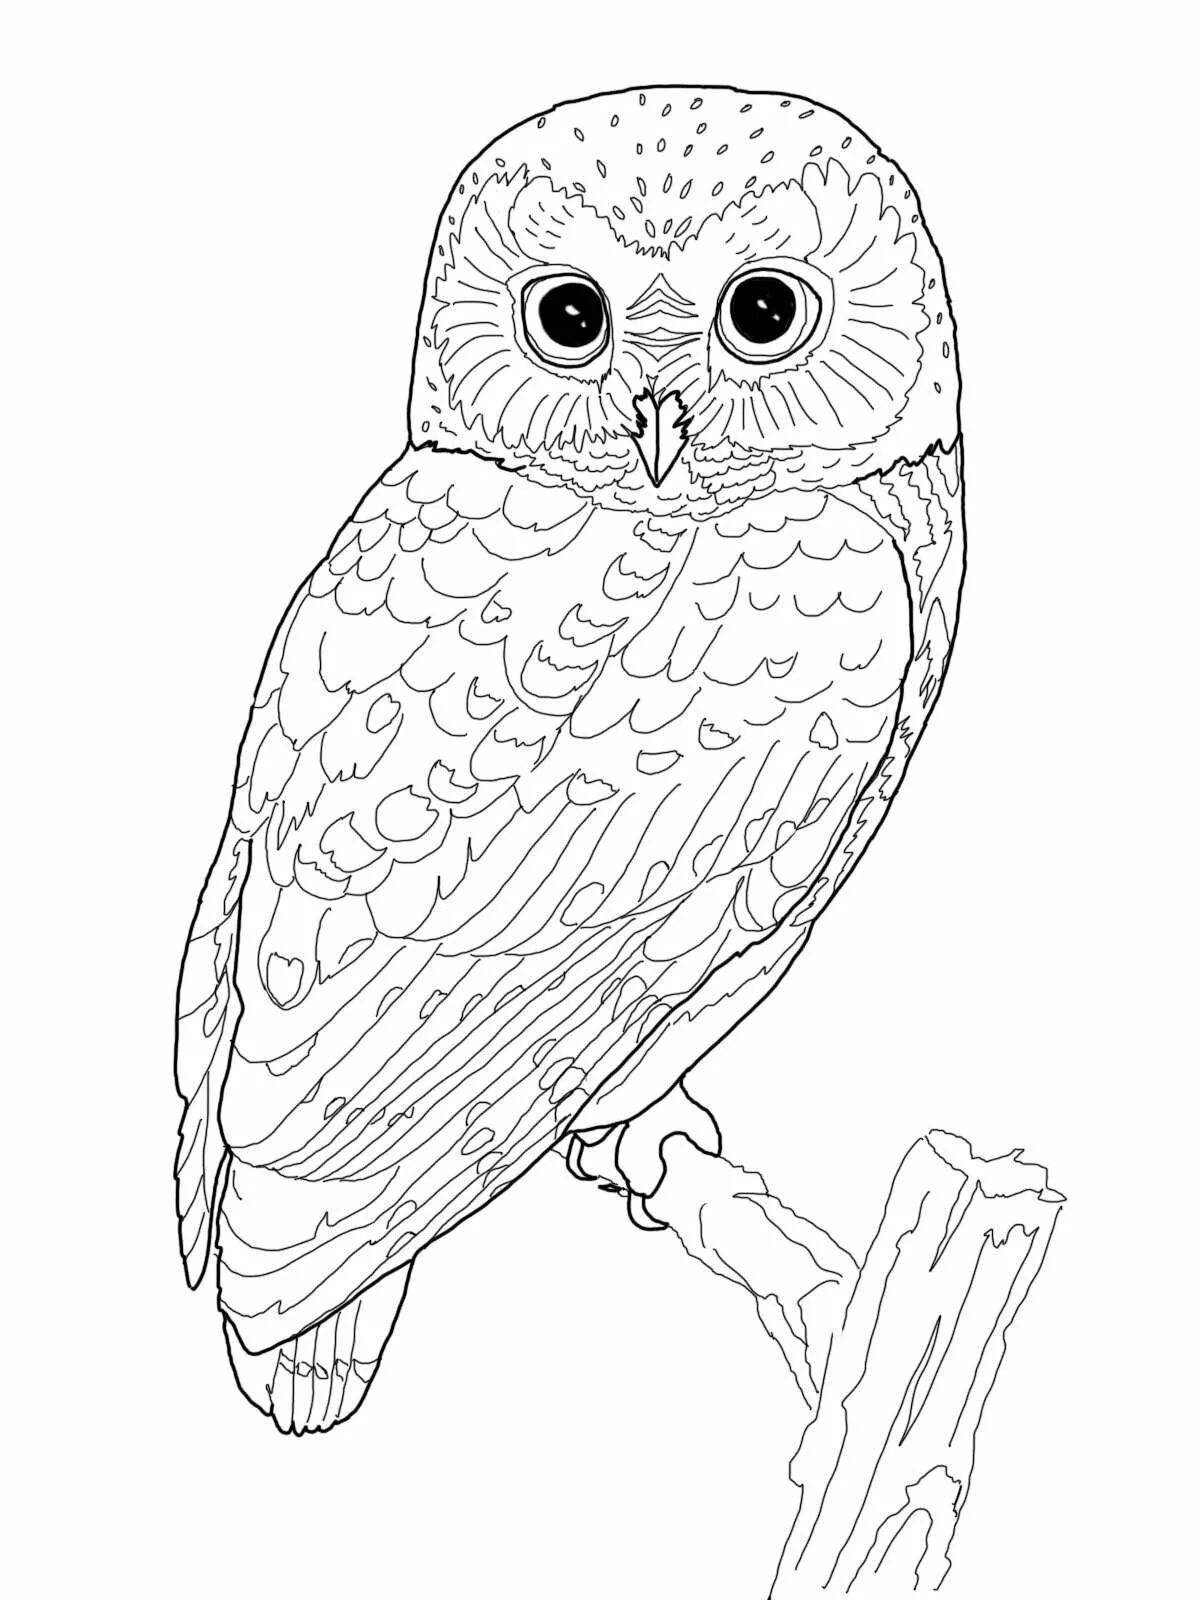 Inspirational coloring book drawing of an owl